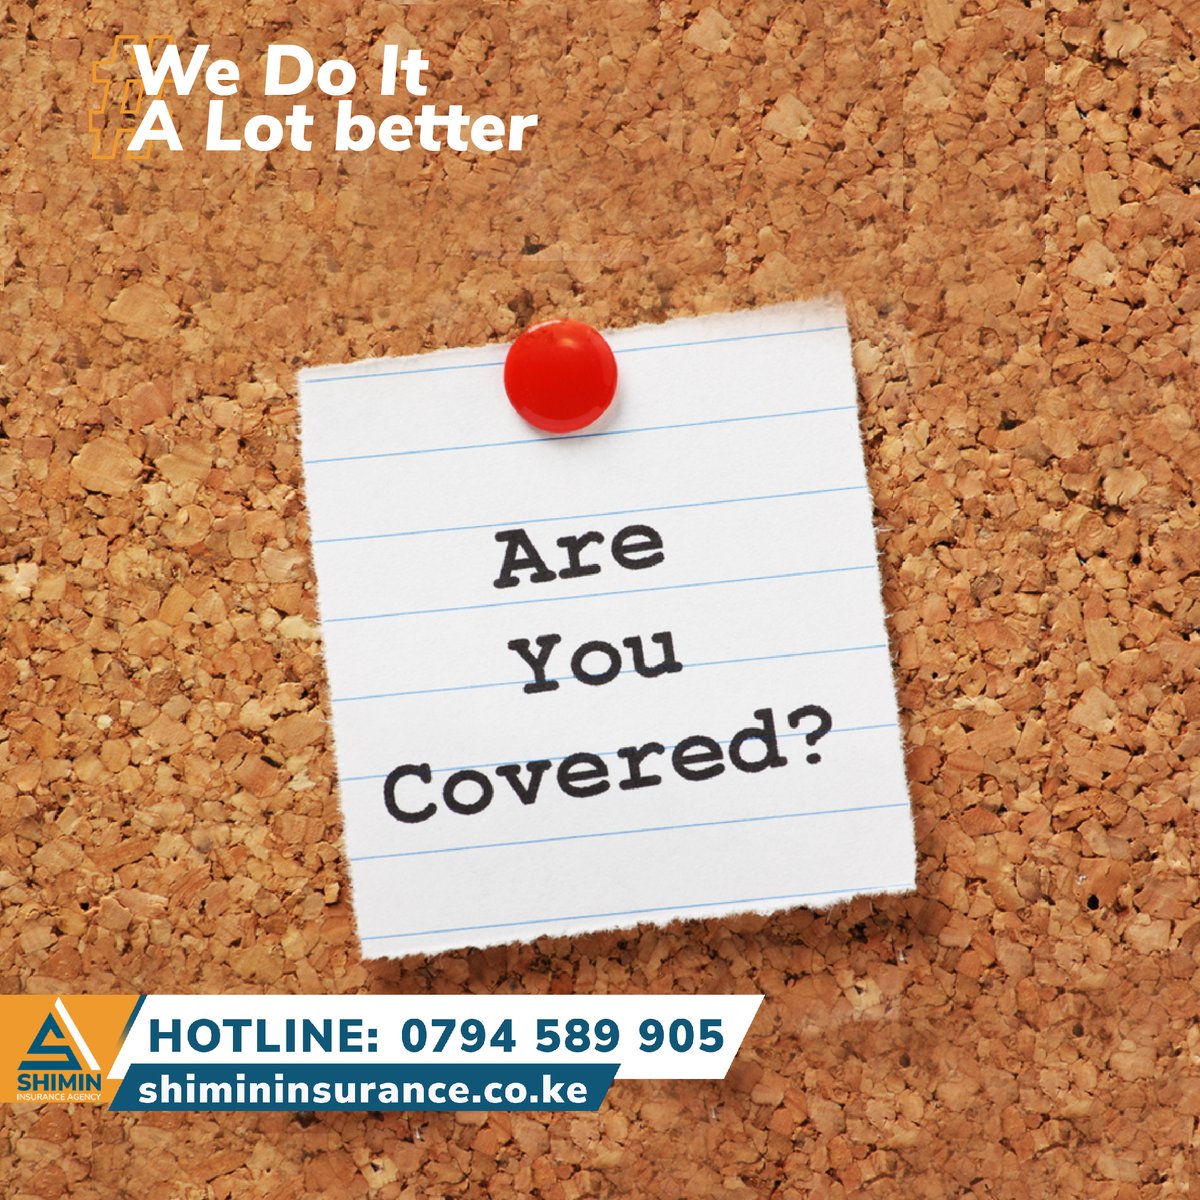 Protect what matters most with the Perfect Insurance Cover. We offer comprehensive coverage tailored to your unique needs. 
Don't leave your future to chance, get covered today! 

#InsuranceProtection #PeaceOfMind